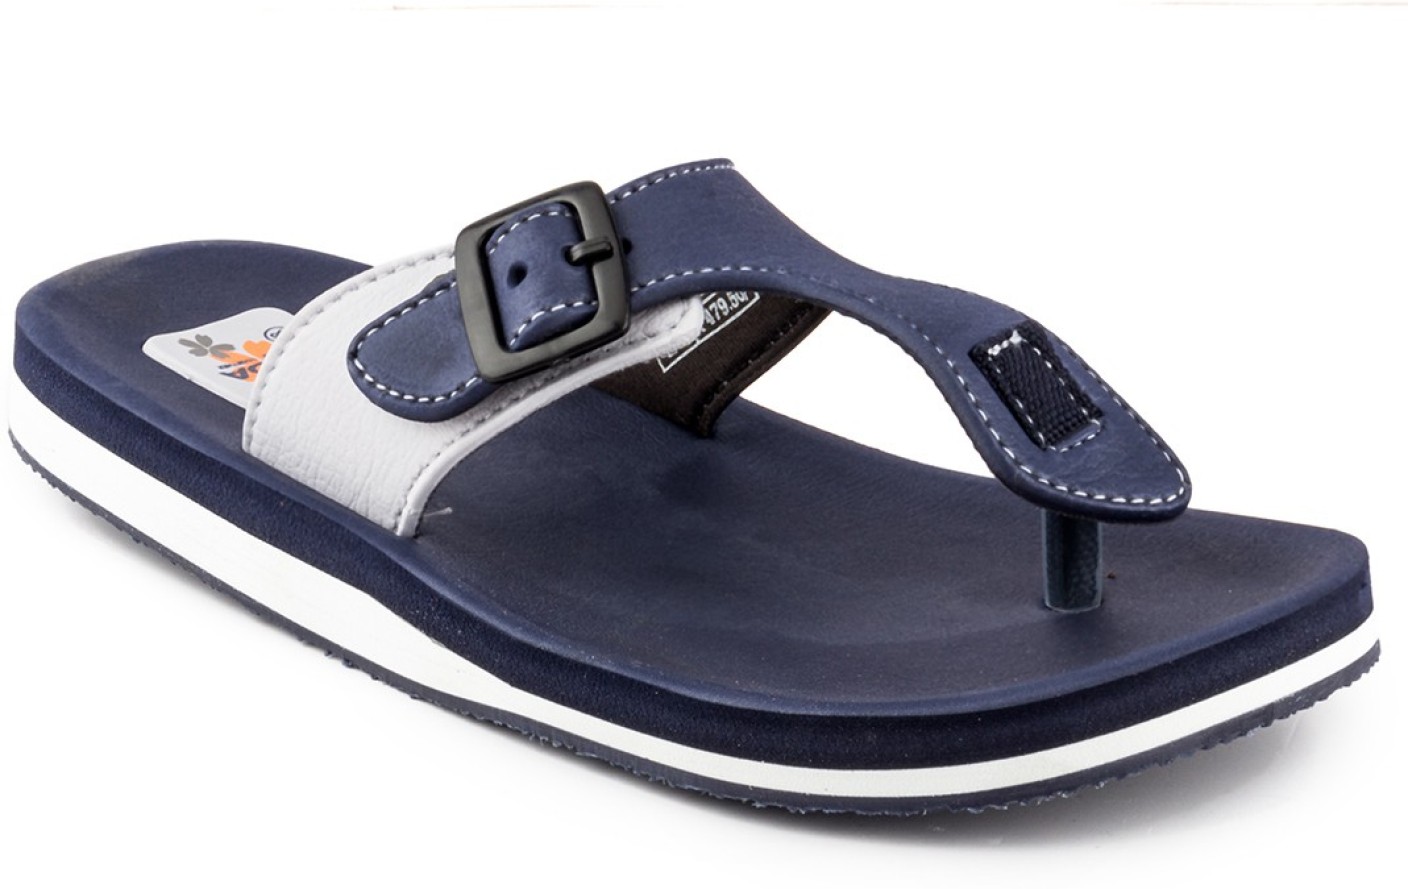 Adda Galaxy Slippers - Buy Navy Color Adda Galaxy Slippers Online at Best Price - Shop Online 